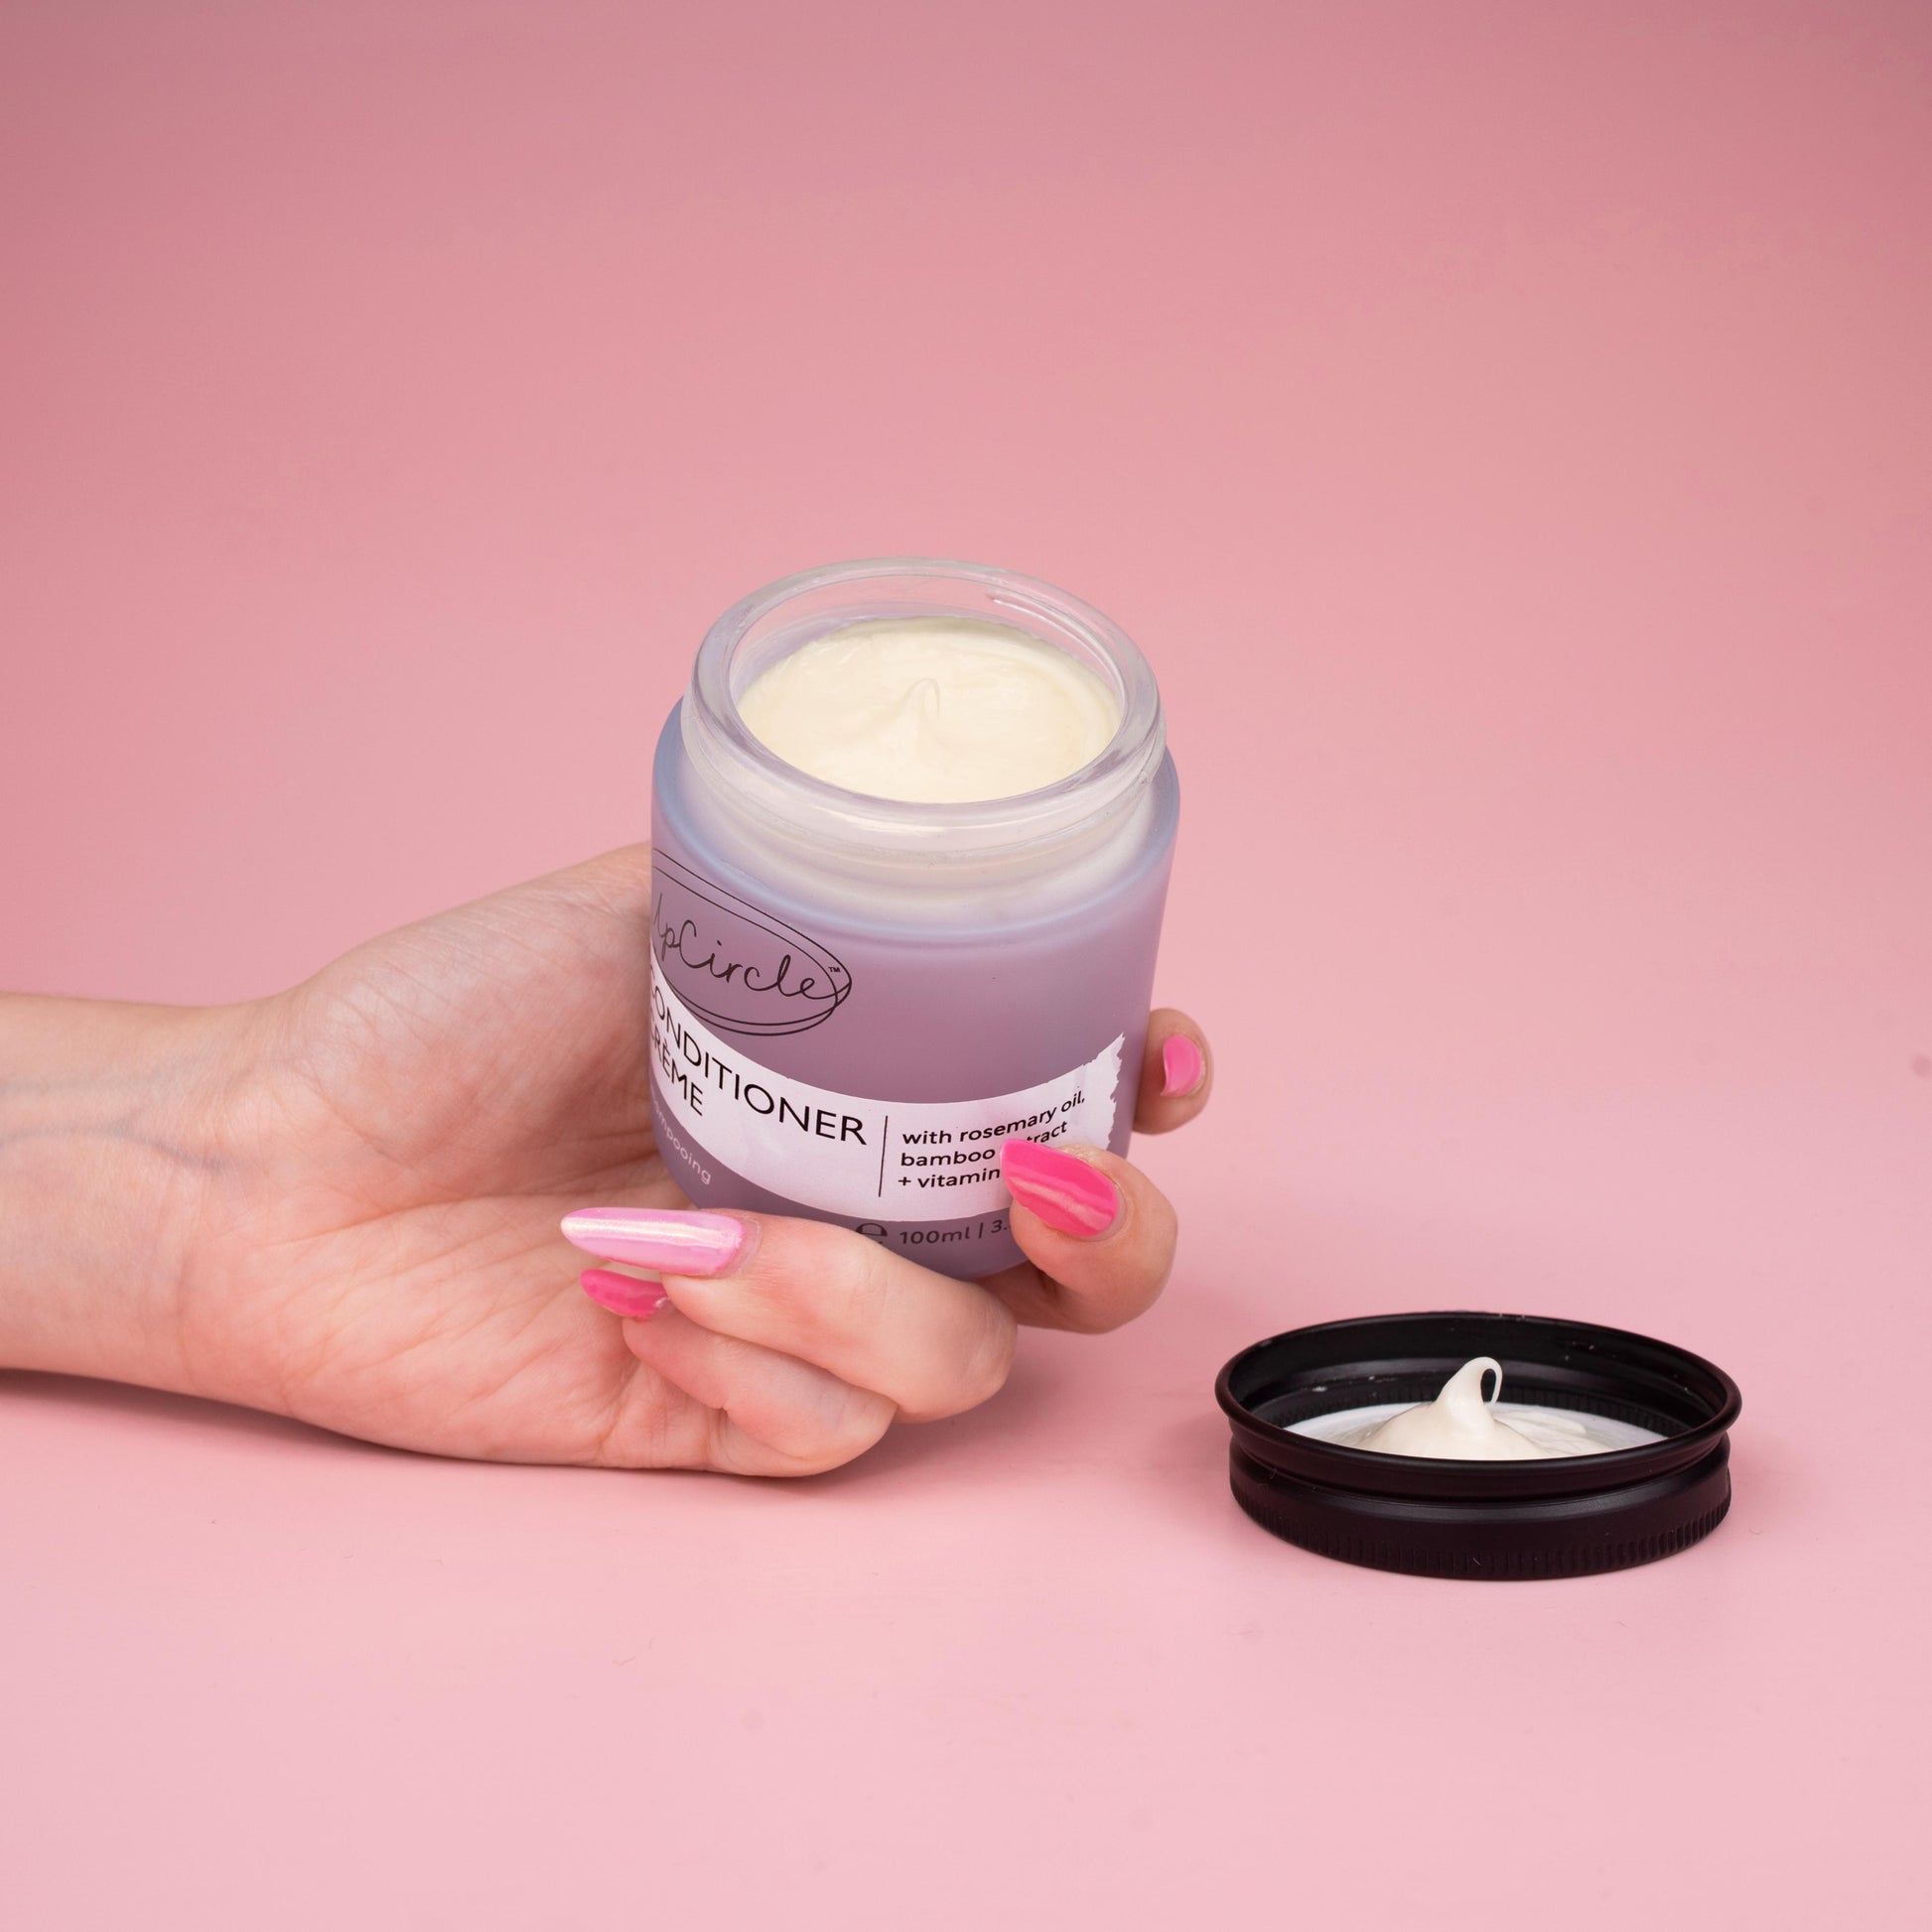 lifestyle photo of upcircle's conditioner cream on a pink background. the conditioner is in a blue/lilac frosted glass jar with black aluminium lid. The jar is open and you can see the creamy texture of the conditioner inside. It is being held by a woman's hand with multi tonal pink finger nails